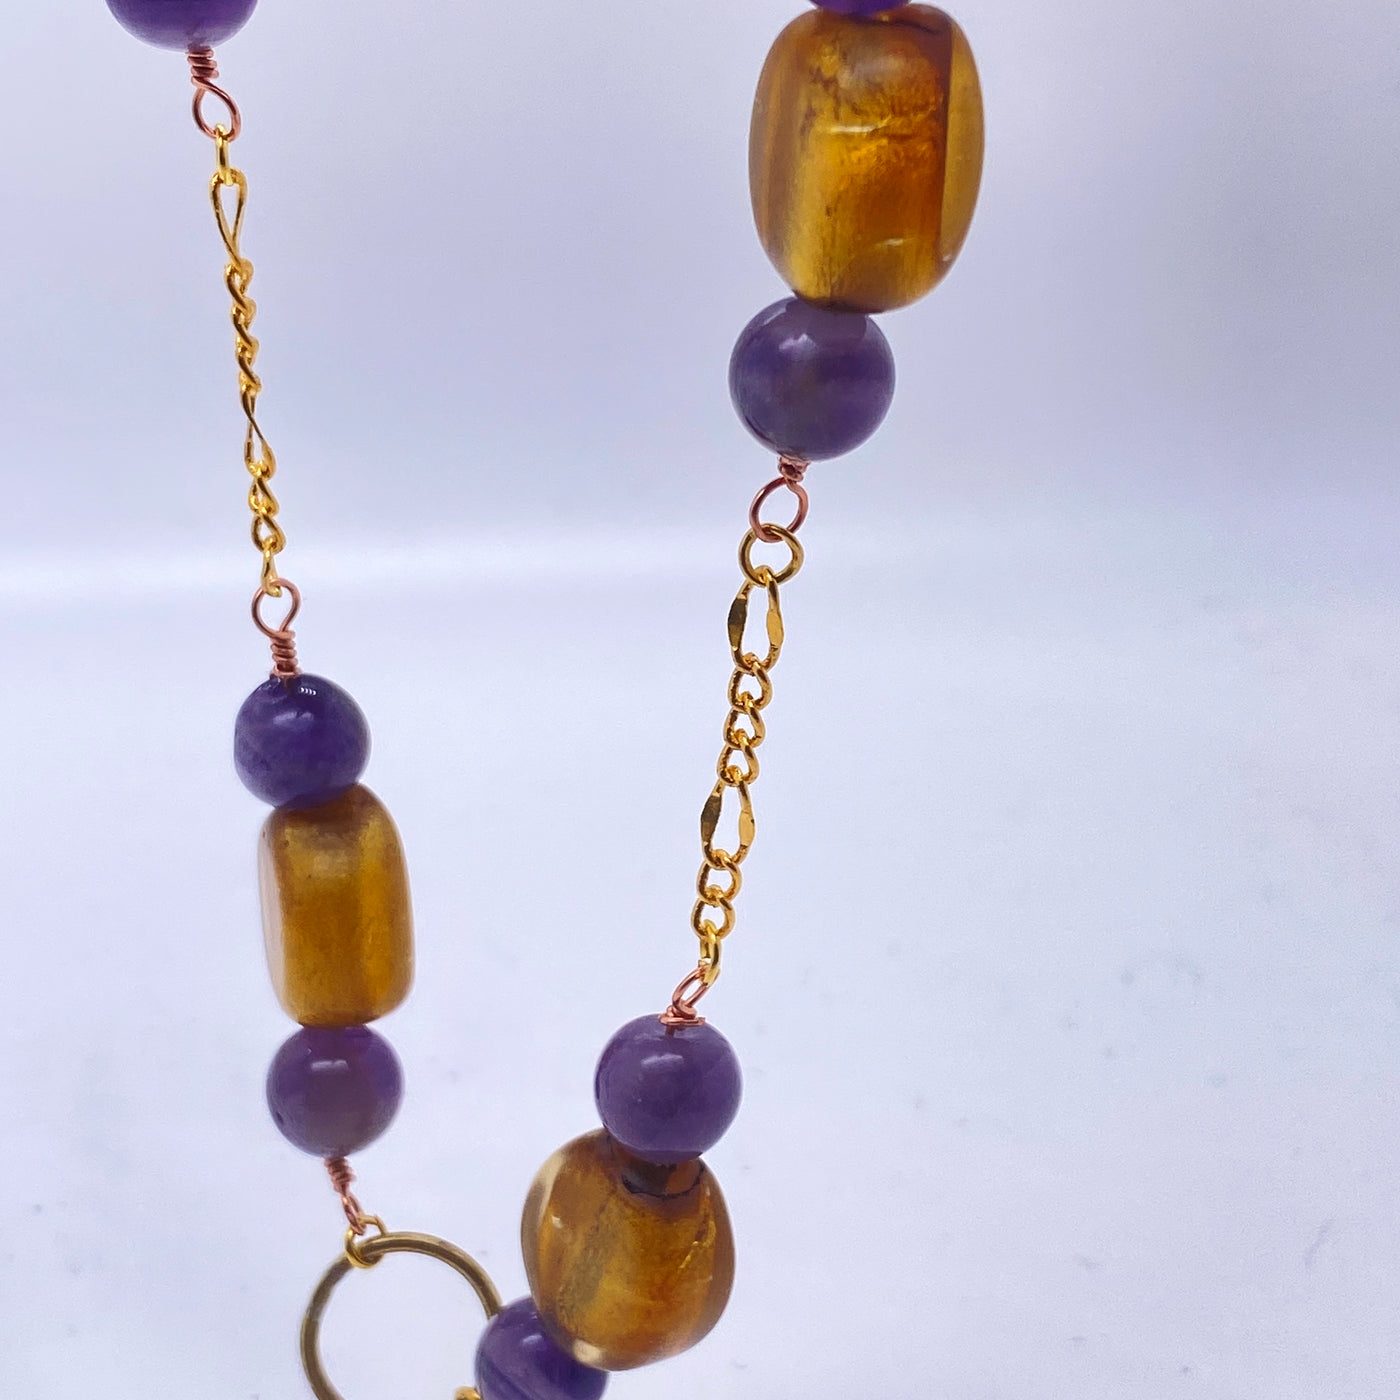 Golden glass beads and amethysts necklace